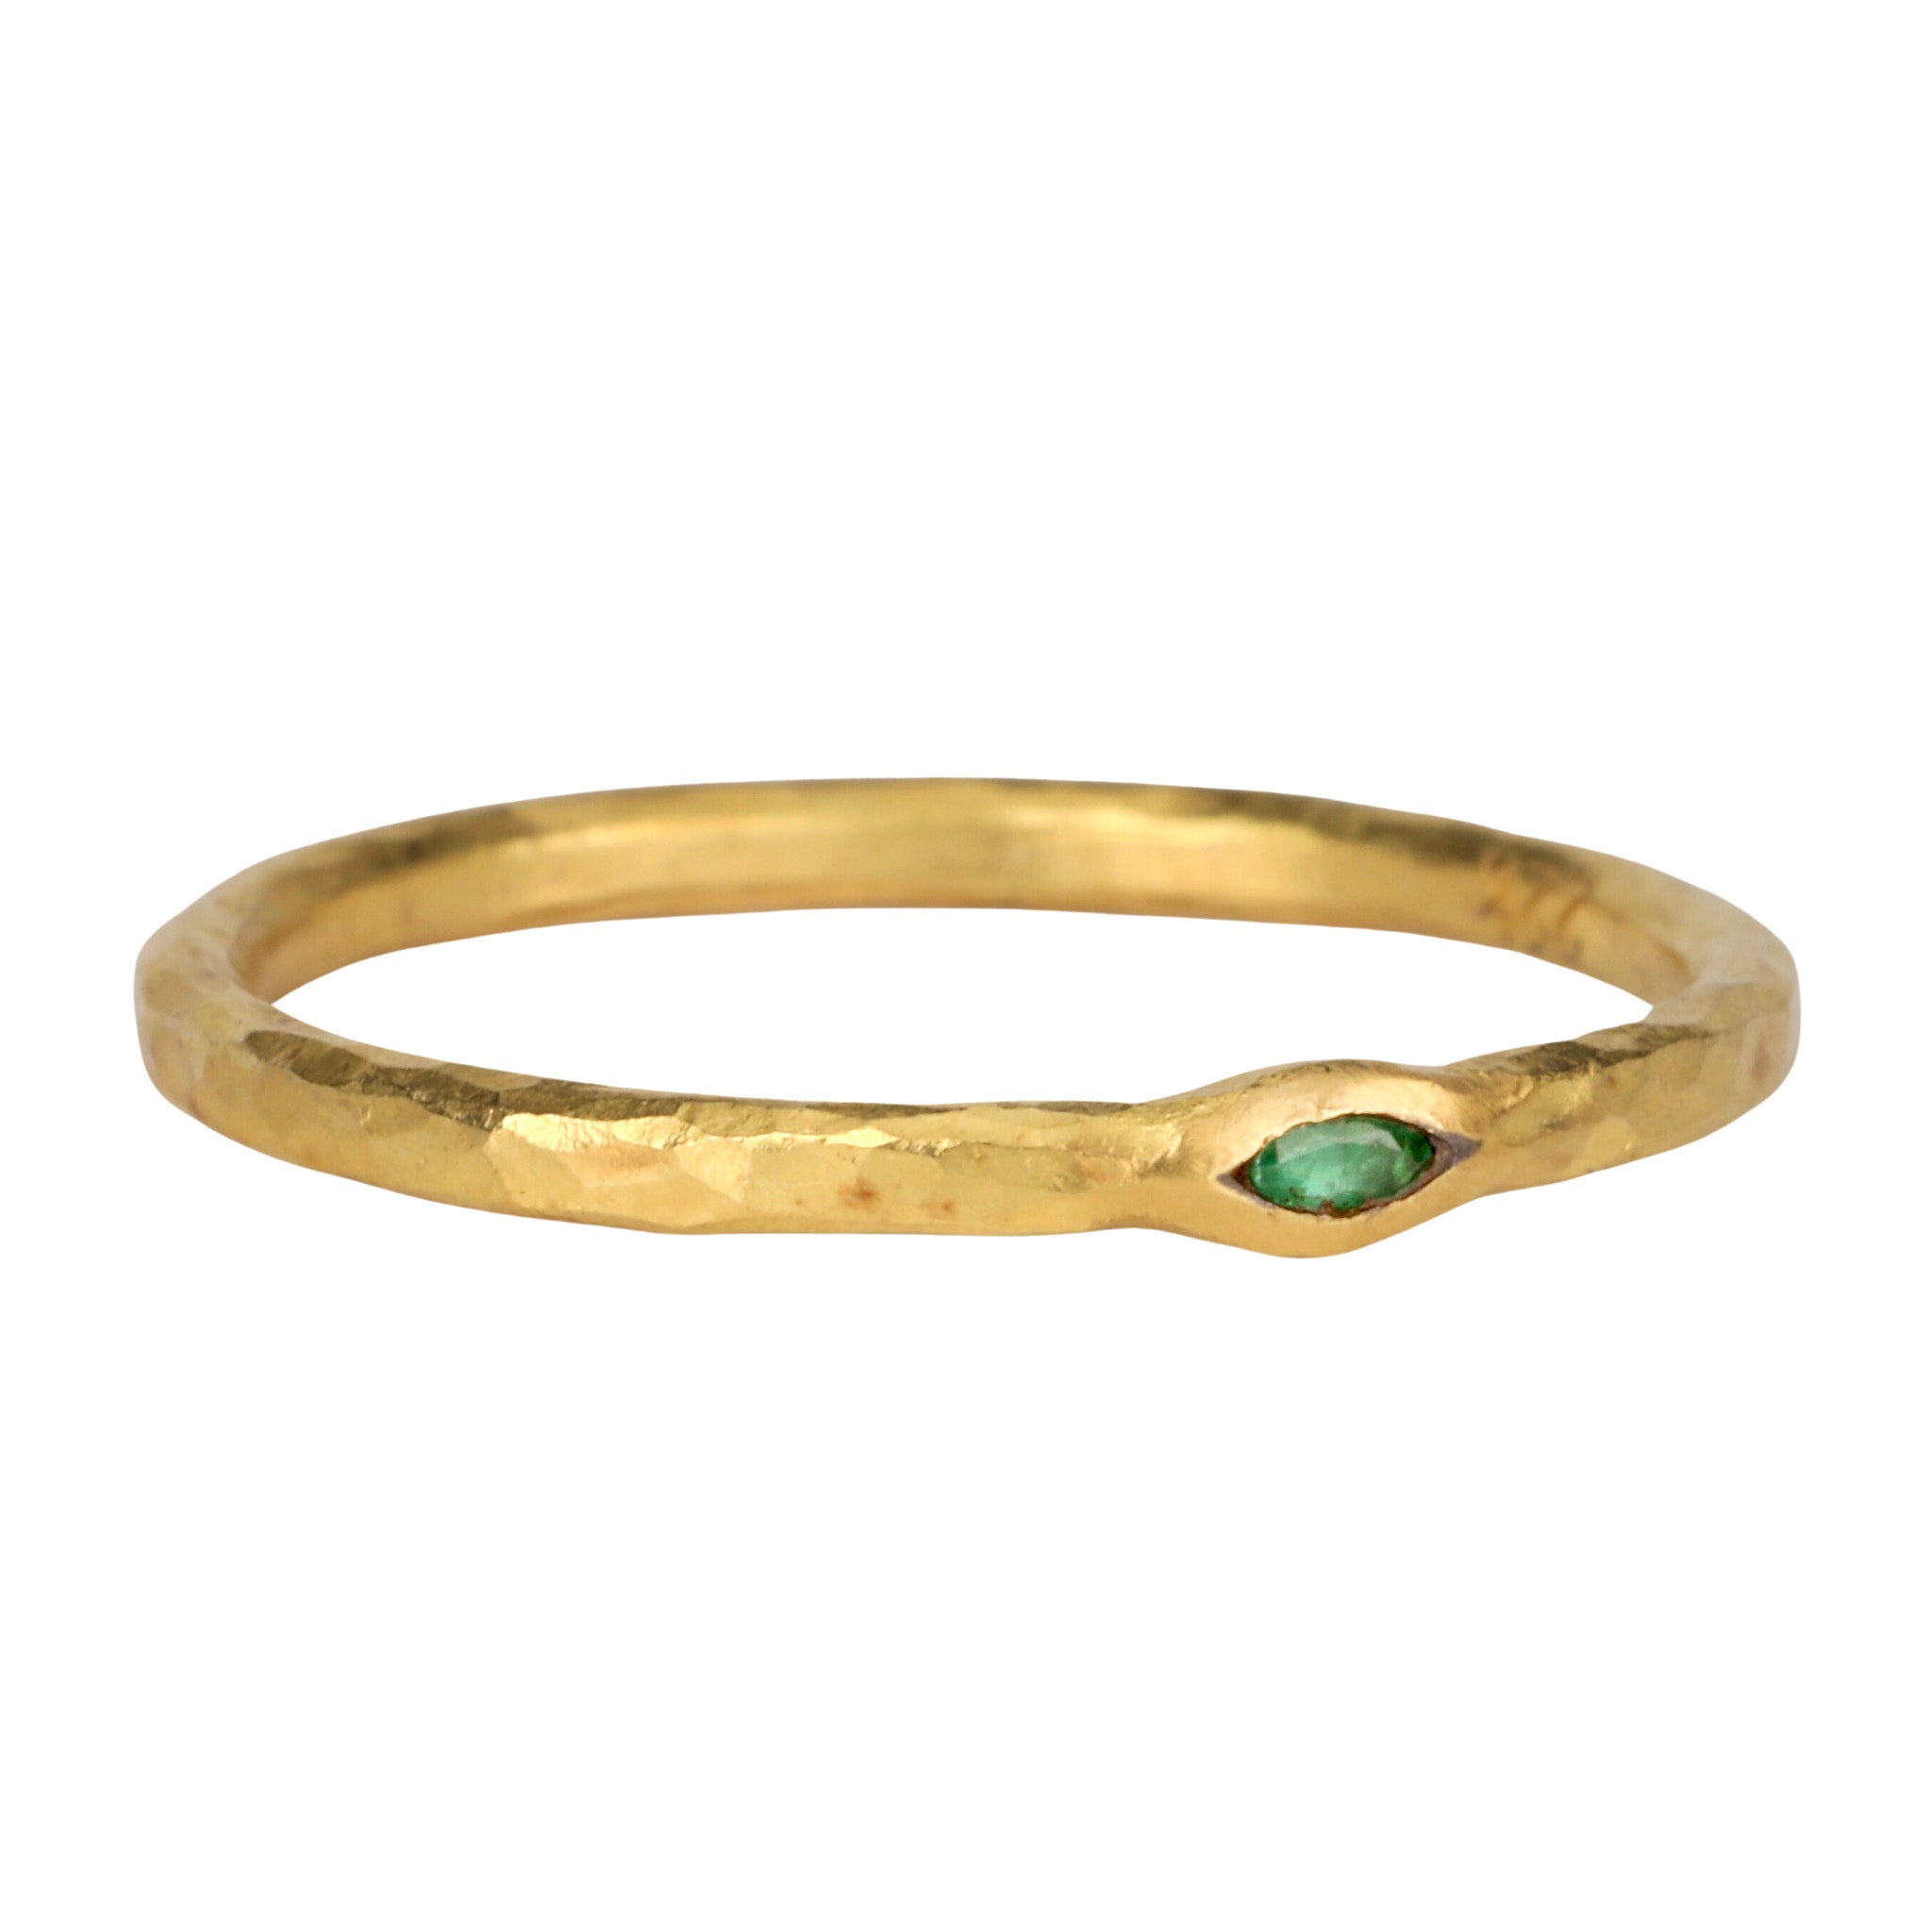 22K Gold Thin Hammered Band with Marquise Emerald - Peridot Fine Jewelry - Cathy Waterman